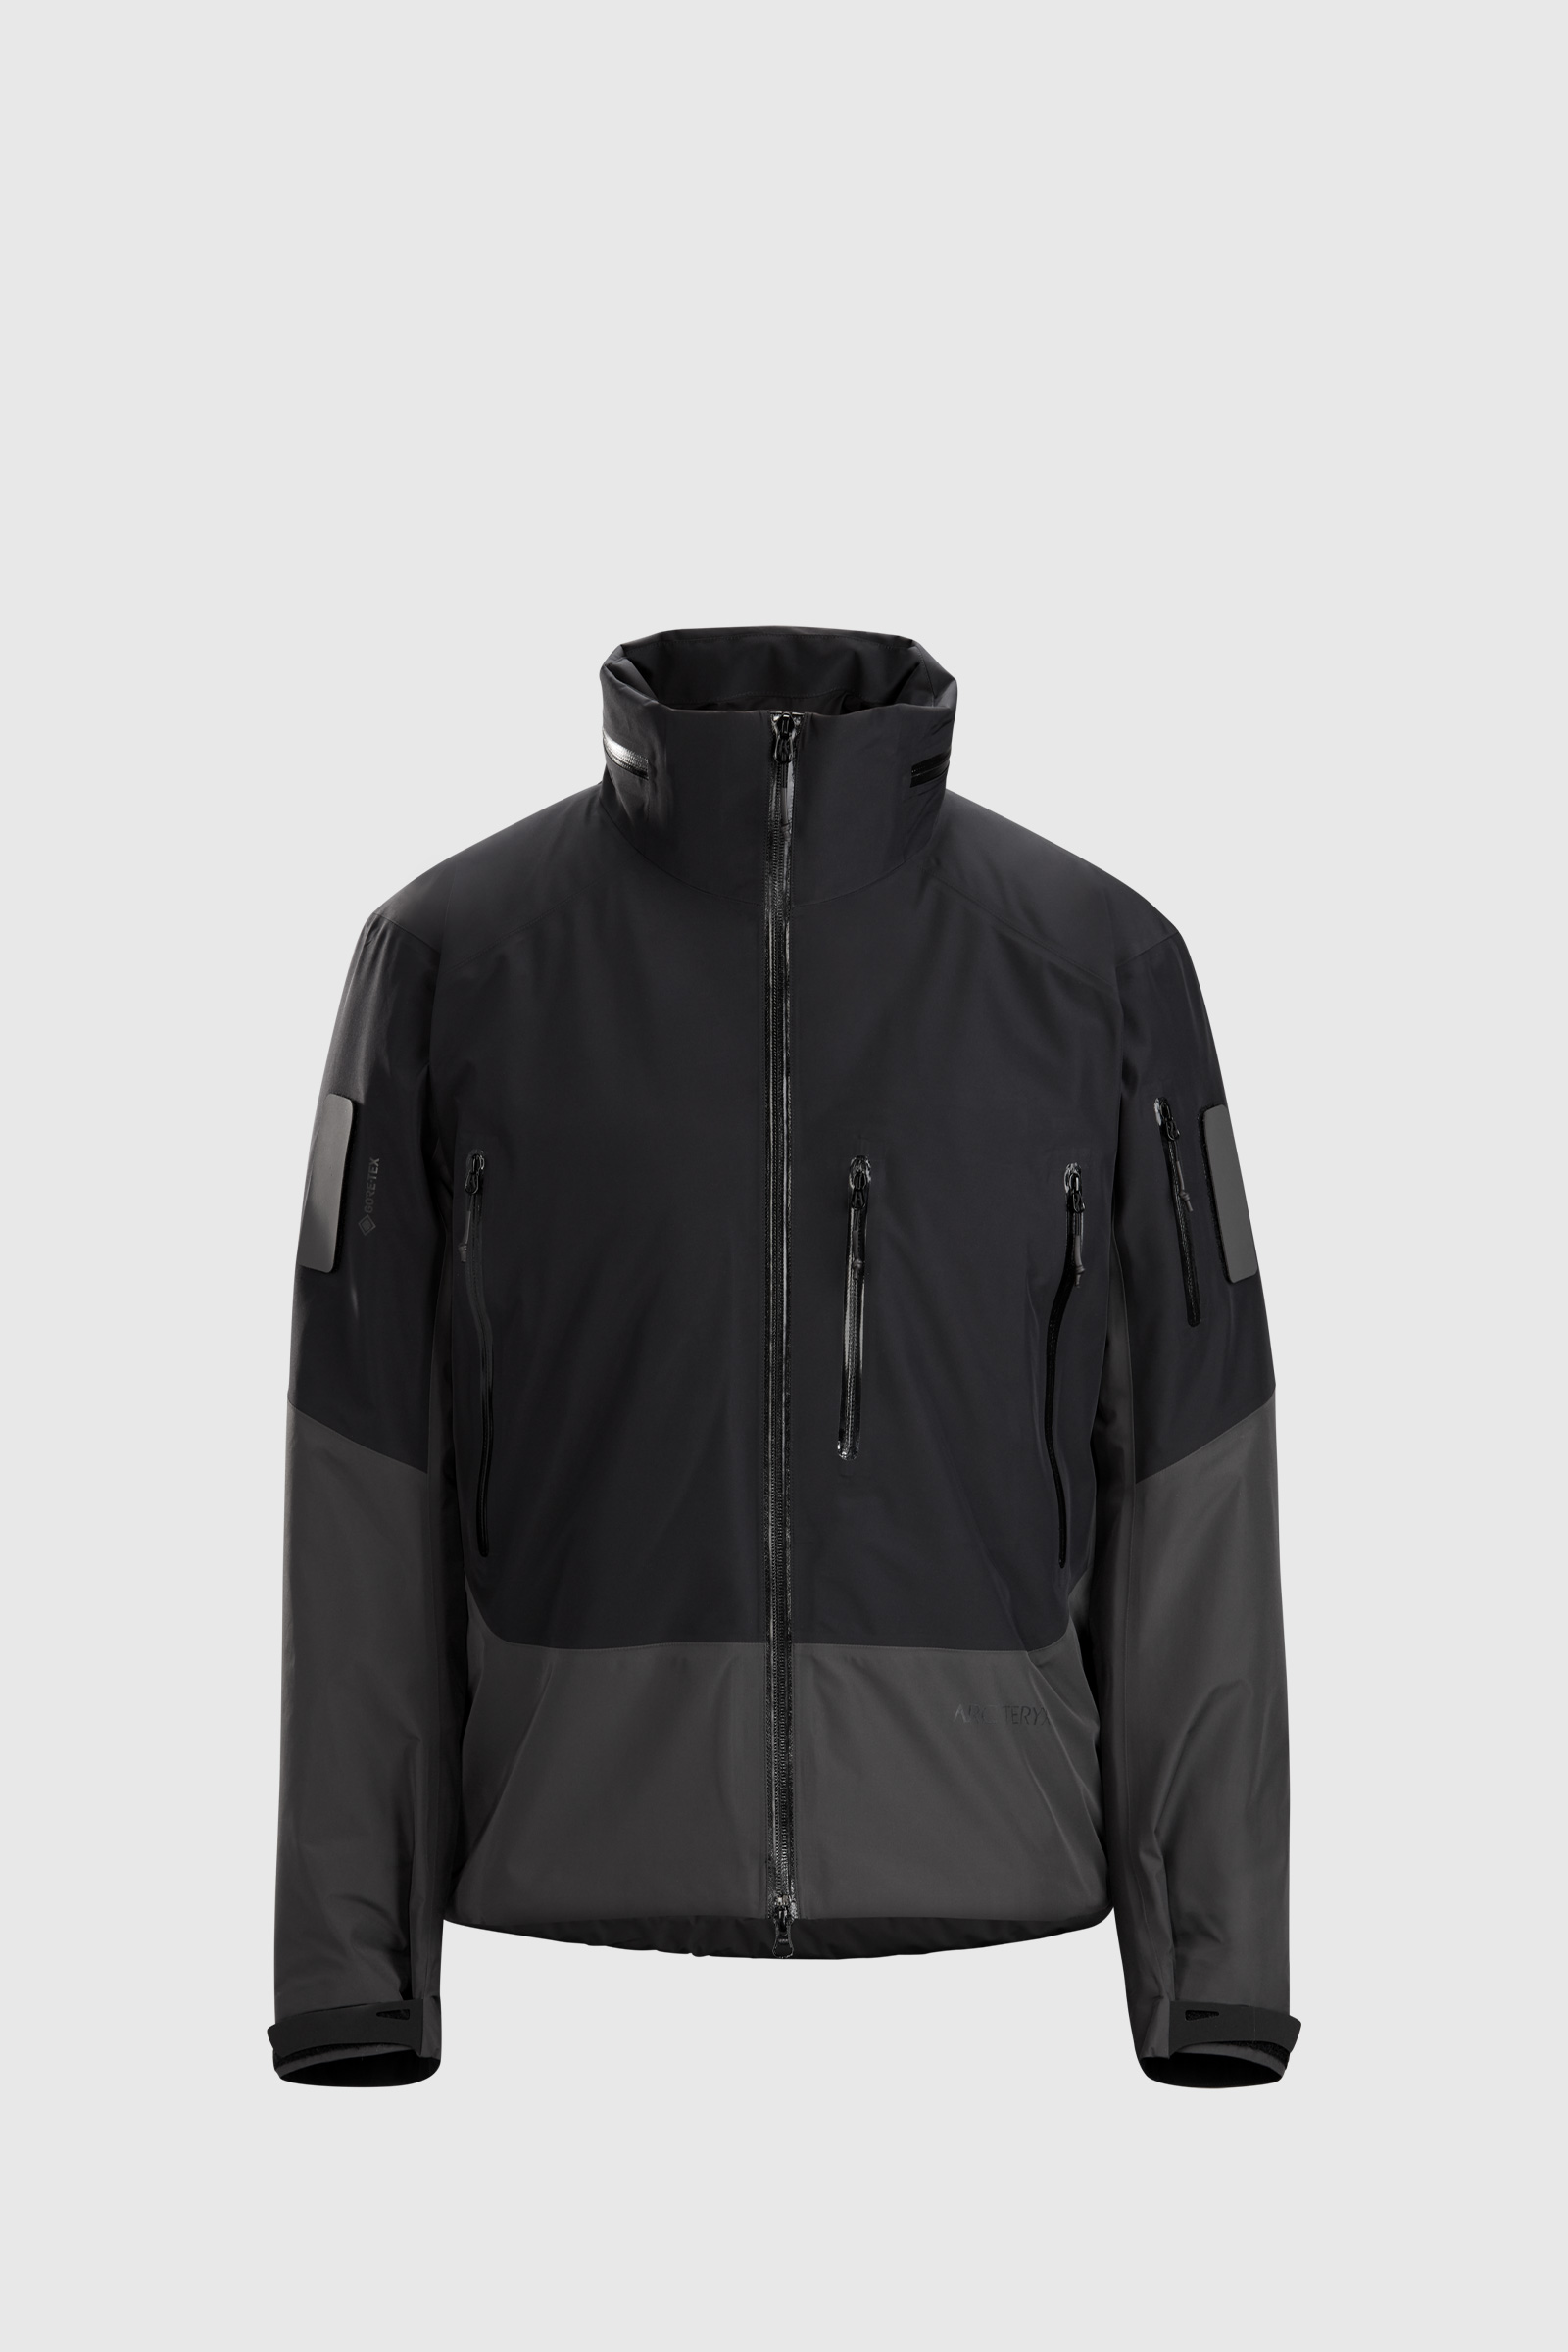 ARC‘TERYX SYSTEM_A AXIS INSULATED JACKET